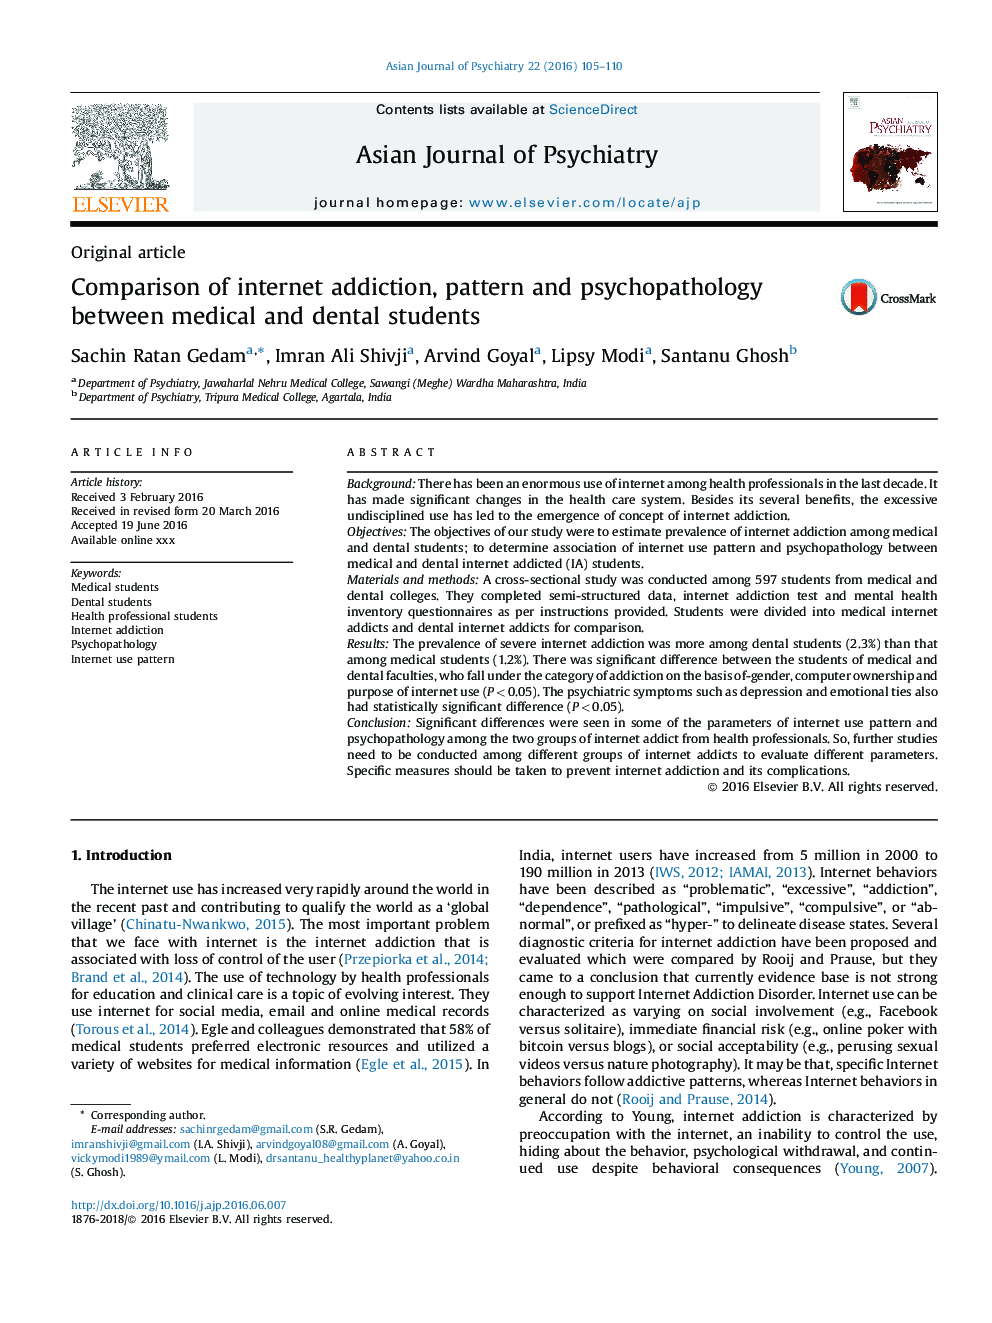 Comparison of internet addiction, pattern and psychopathology between medical and dental students